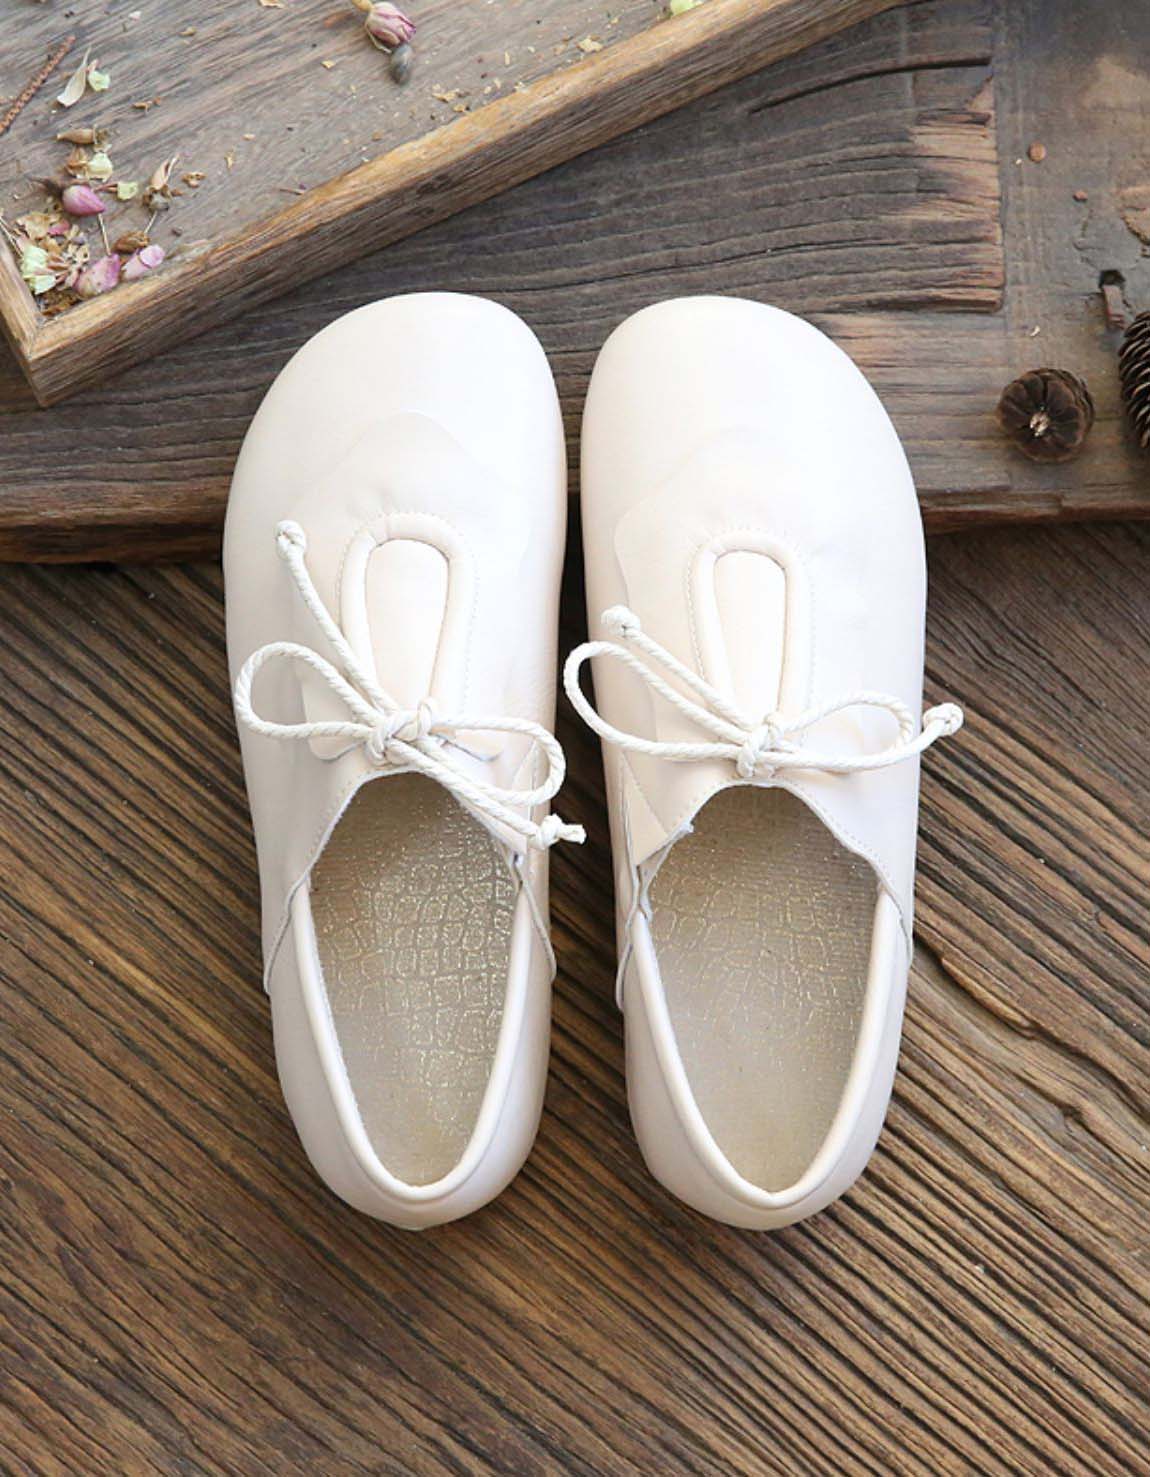 Spring Slip-on Comfortable Lace-up Flat Shoes